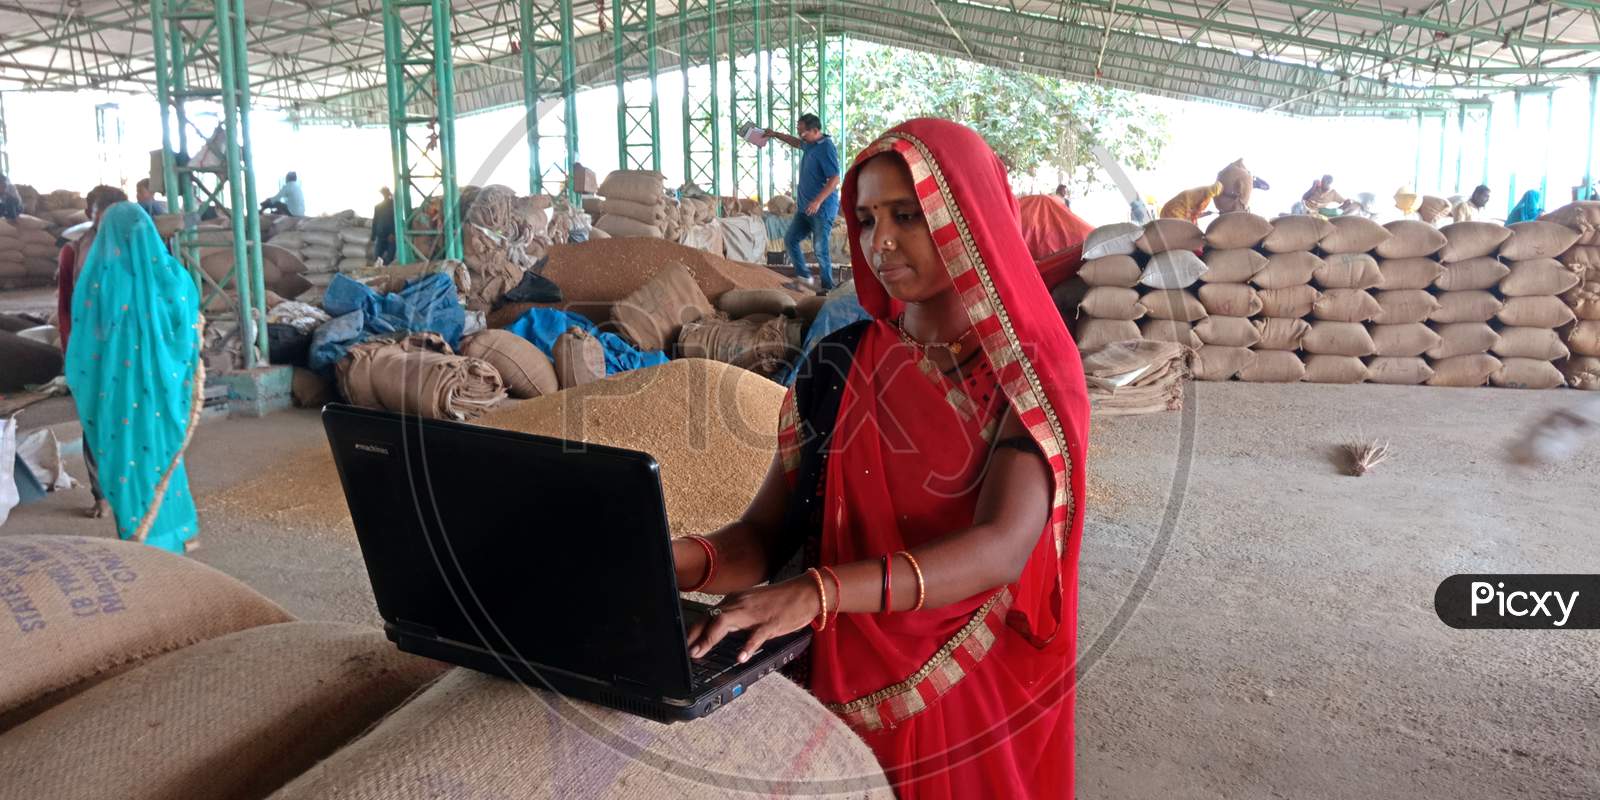 Laptop Technology Using By Indian Poor People.